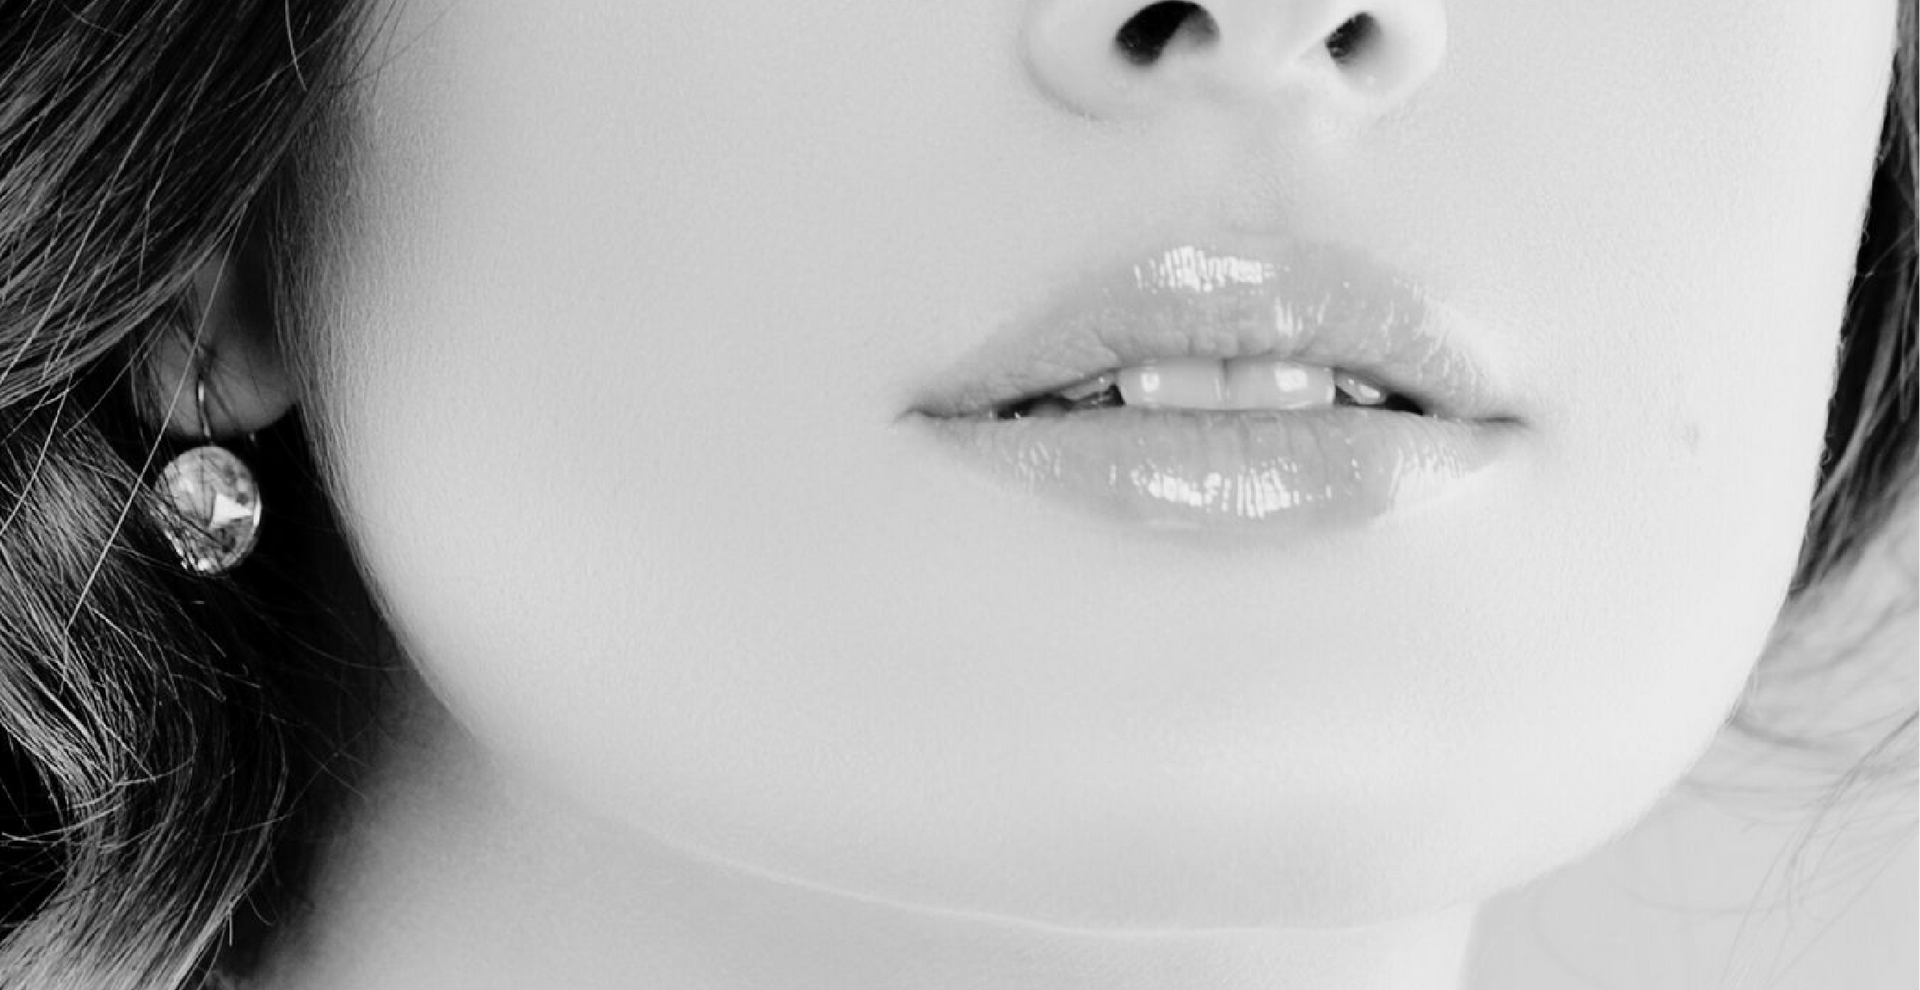 A close up of a woman 's lips and nose in a black and white photo.